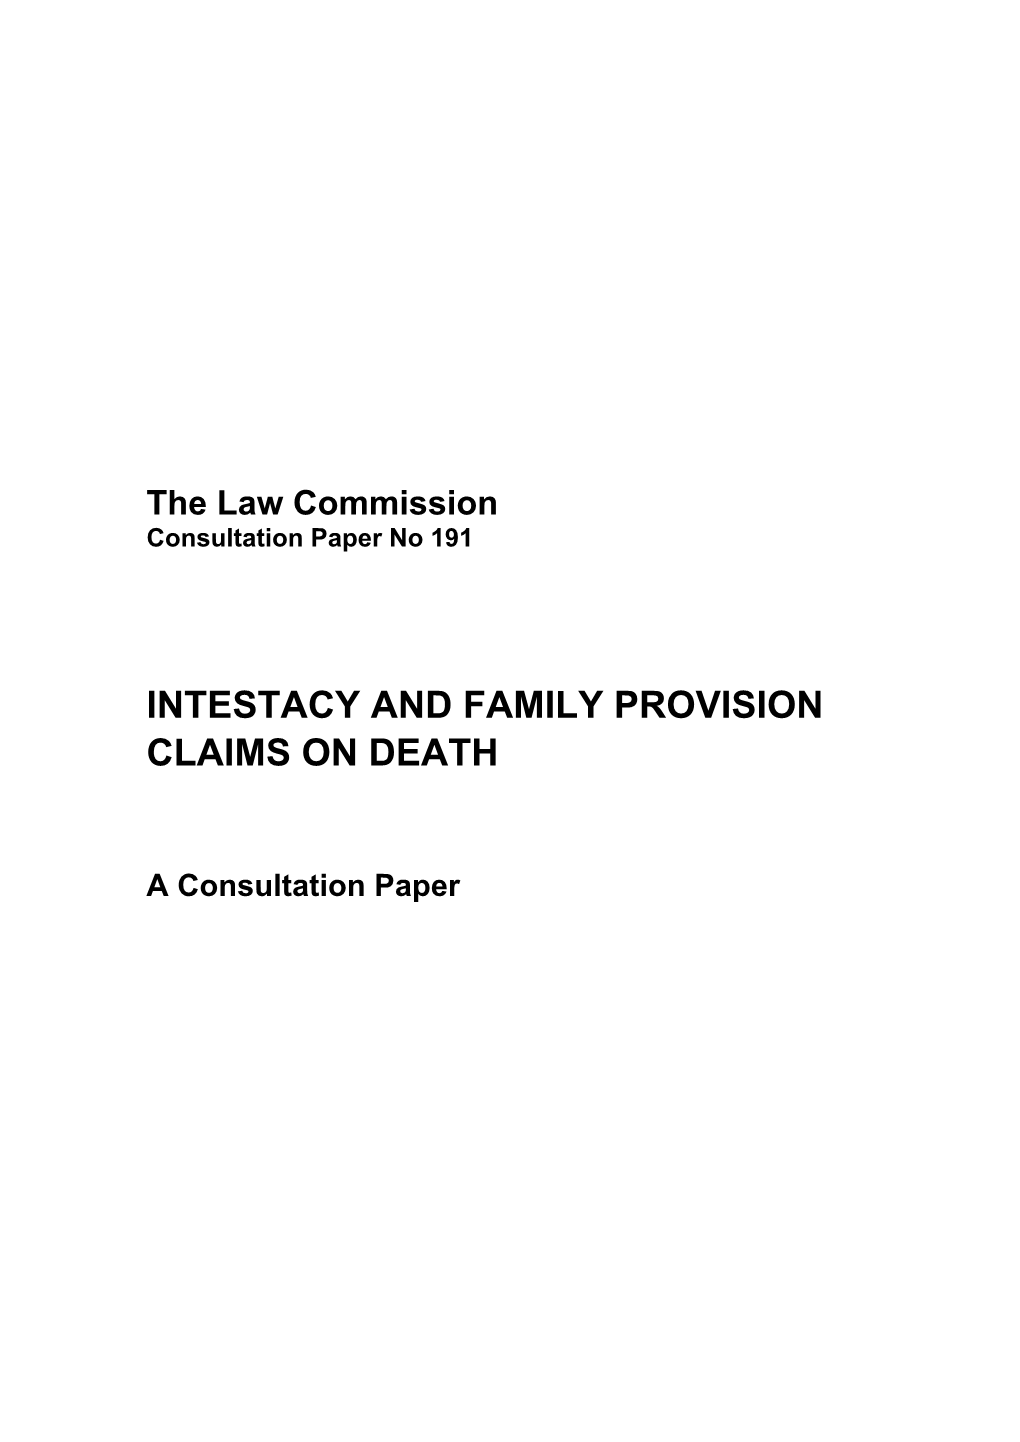 Intestacy and Family Provision Claims on Death